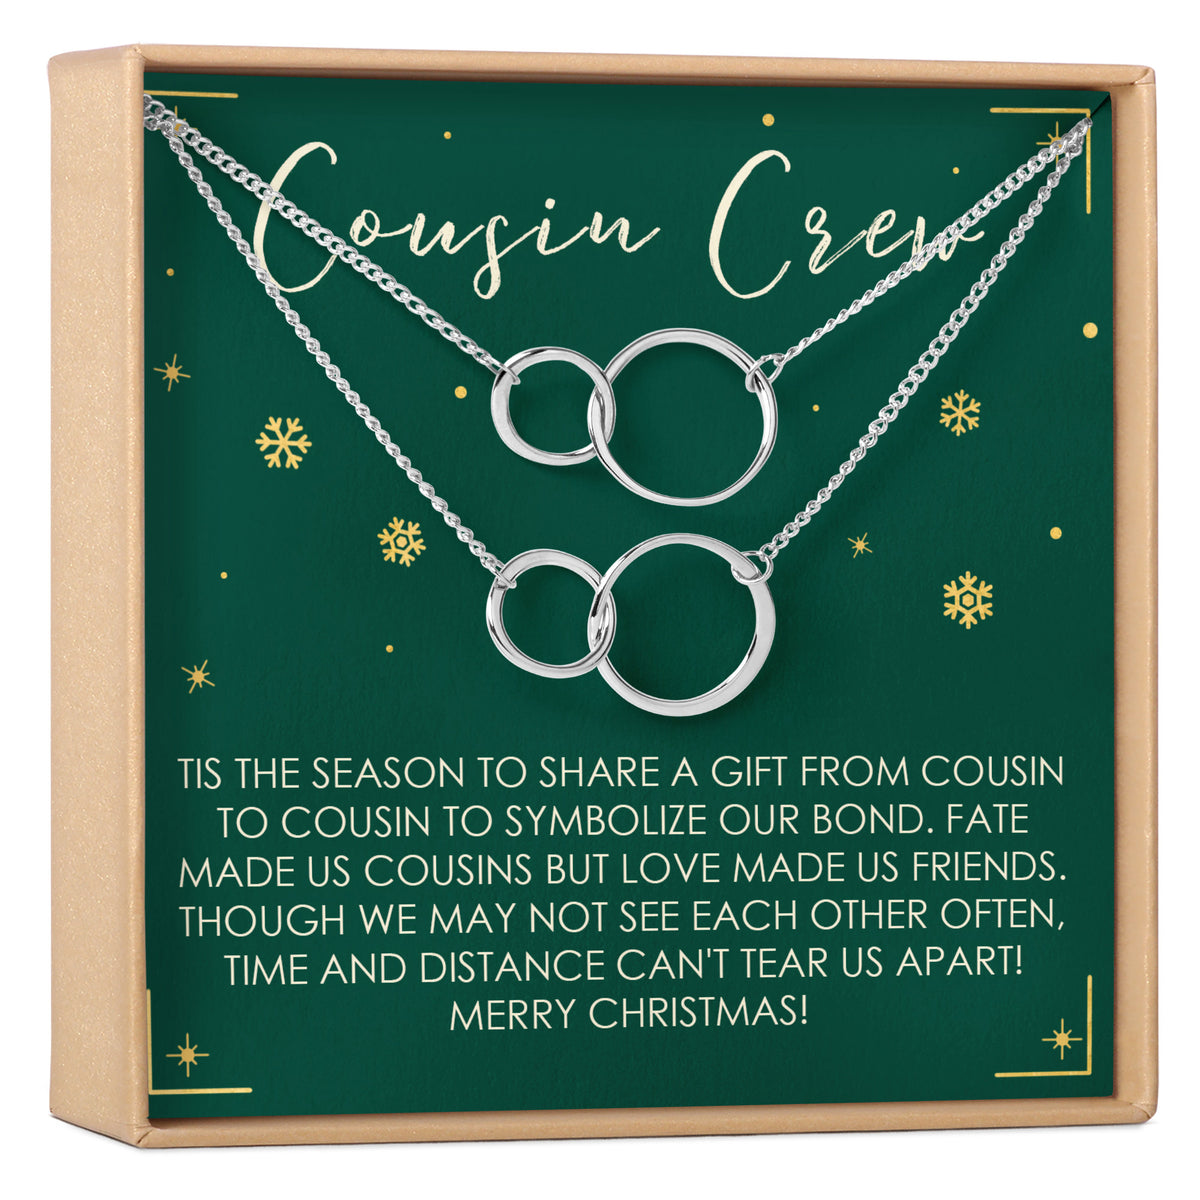 Christmas Gift for Cousin Double Circles Necklace Set